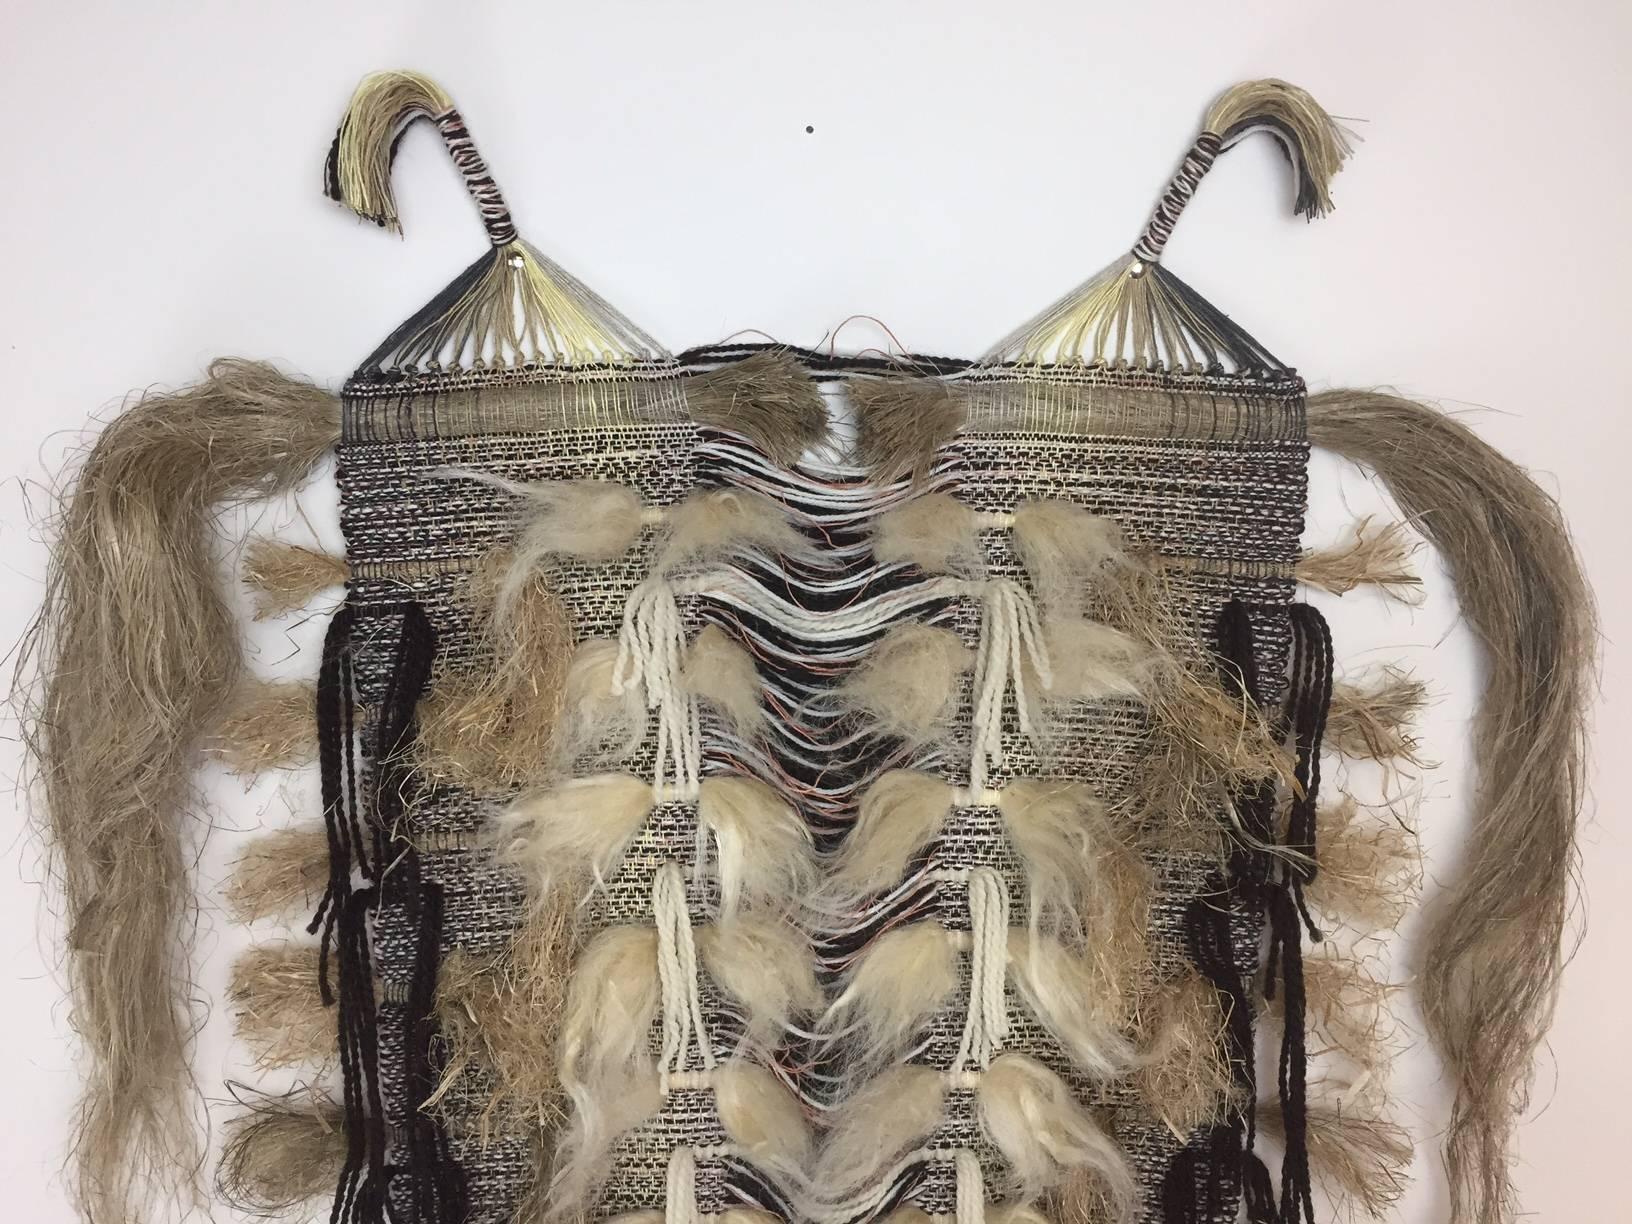 Stunning natural weaving titled, "Regeneration : Go Ahead, Make the Cut" by artist, Neil Goss, 2017. Hemp, wool, alpaca, and natural dyes. 

Neil Goss lives in the countryside of Eudora, KS where he focuses his art on Earth processes